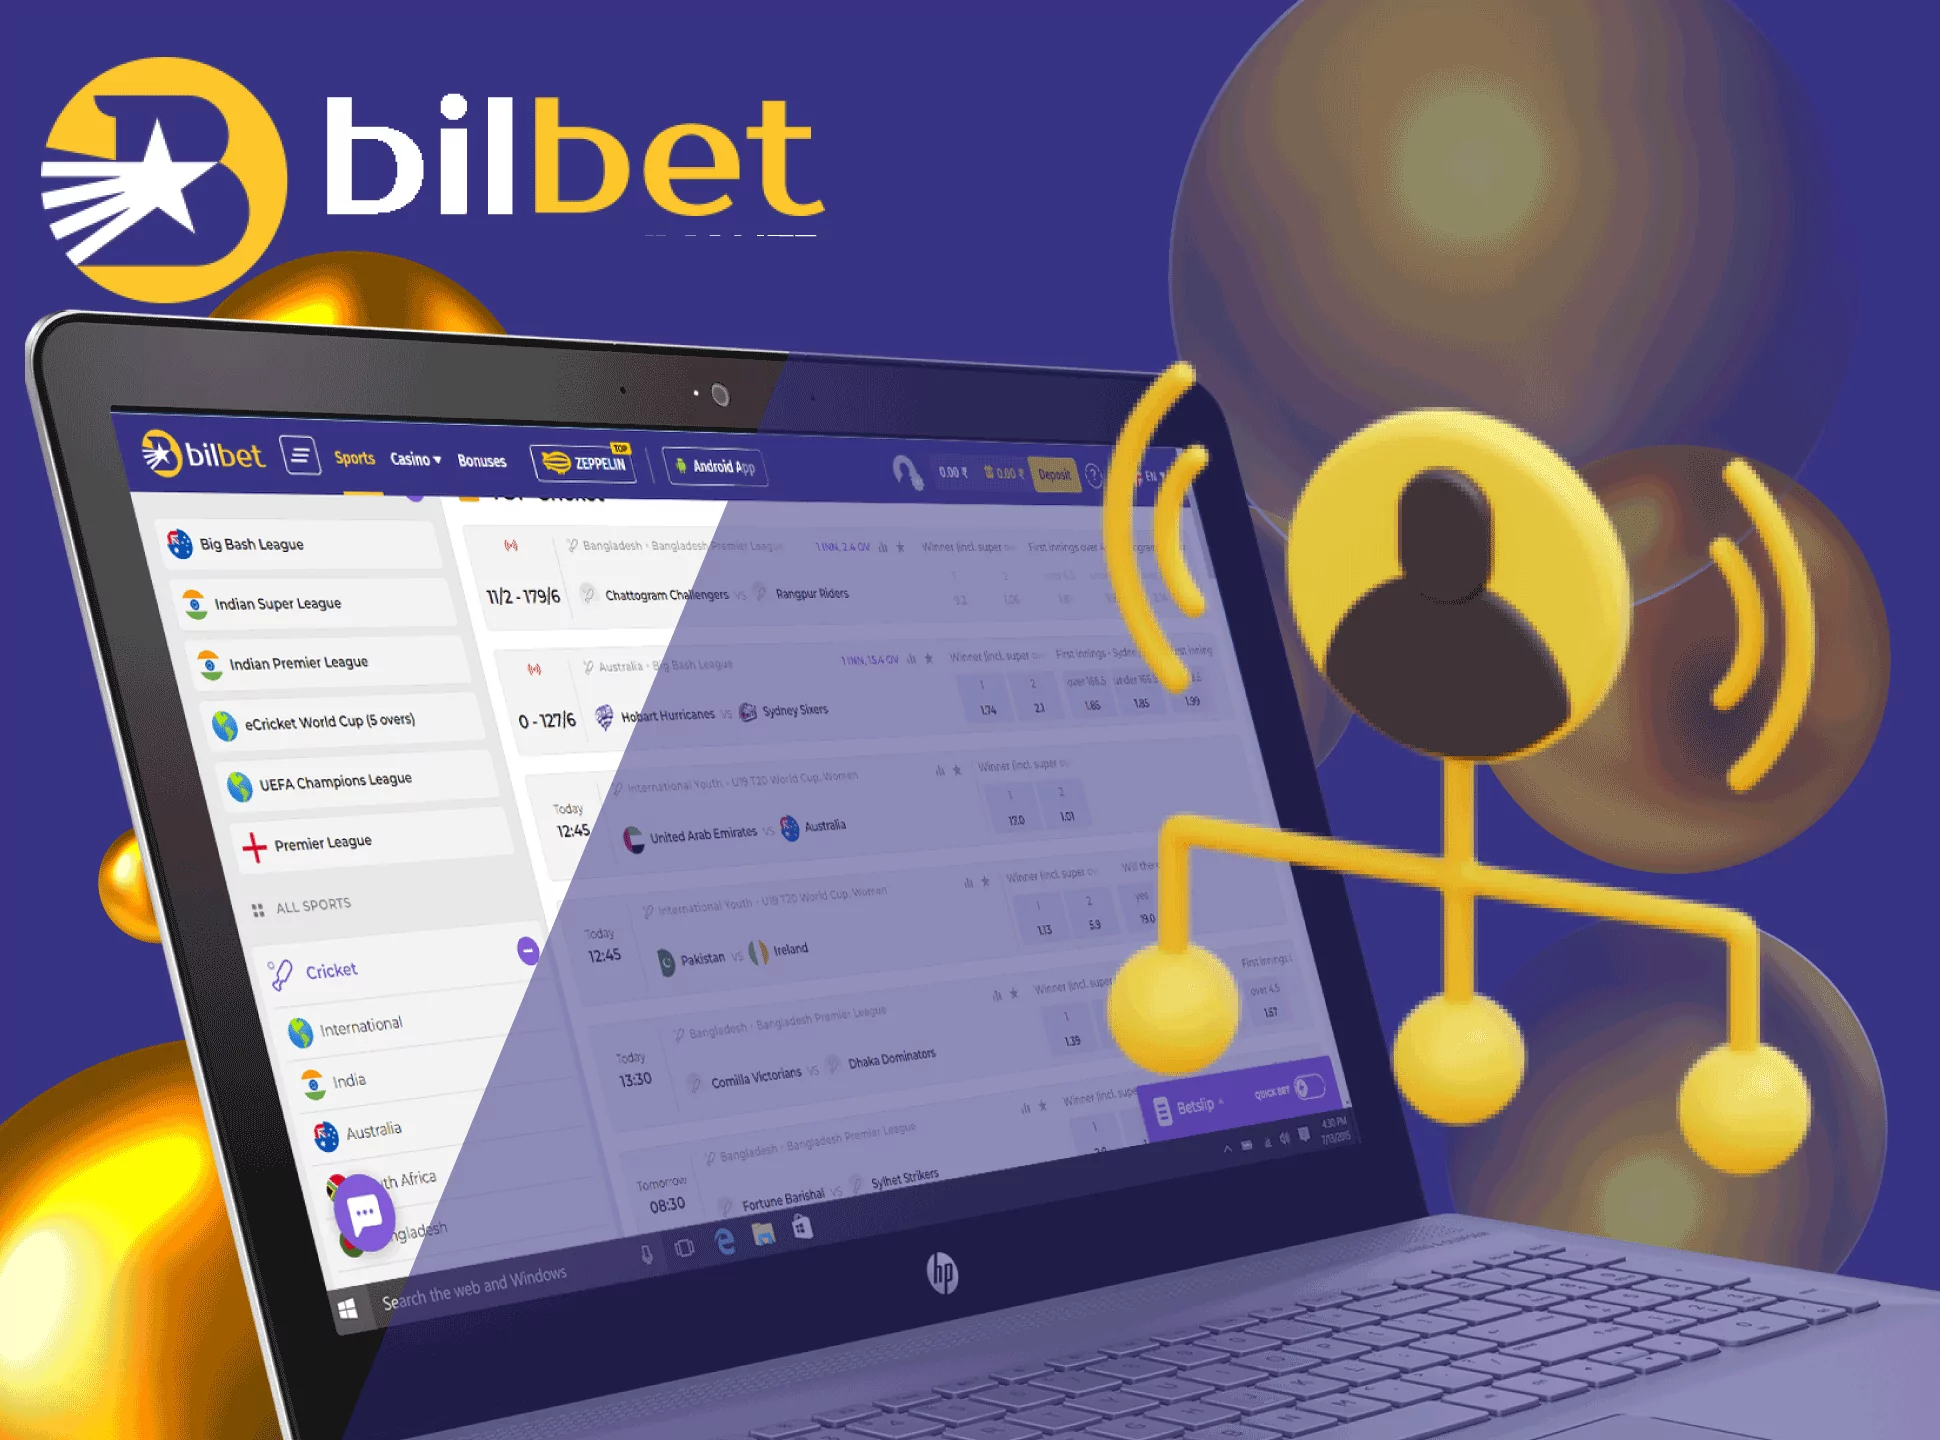 Get an additional income source with the Bilbet affiliate program.